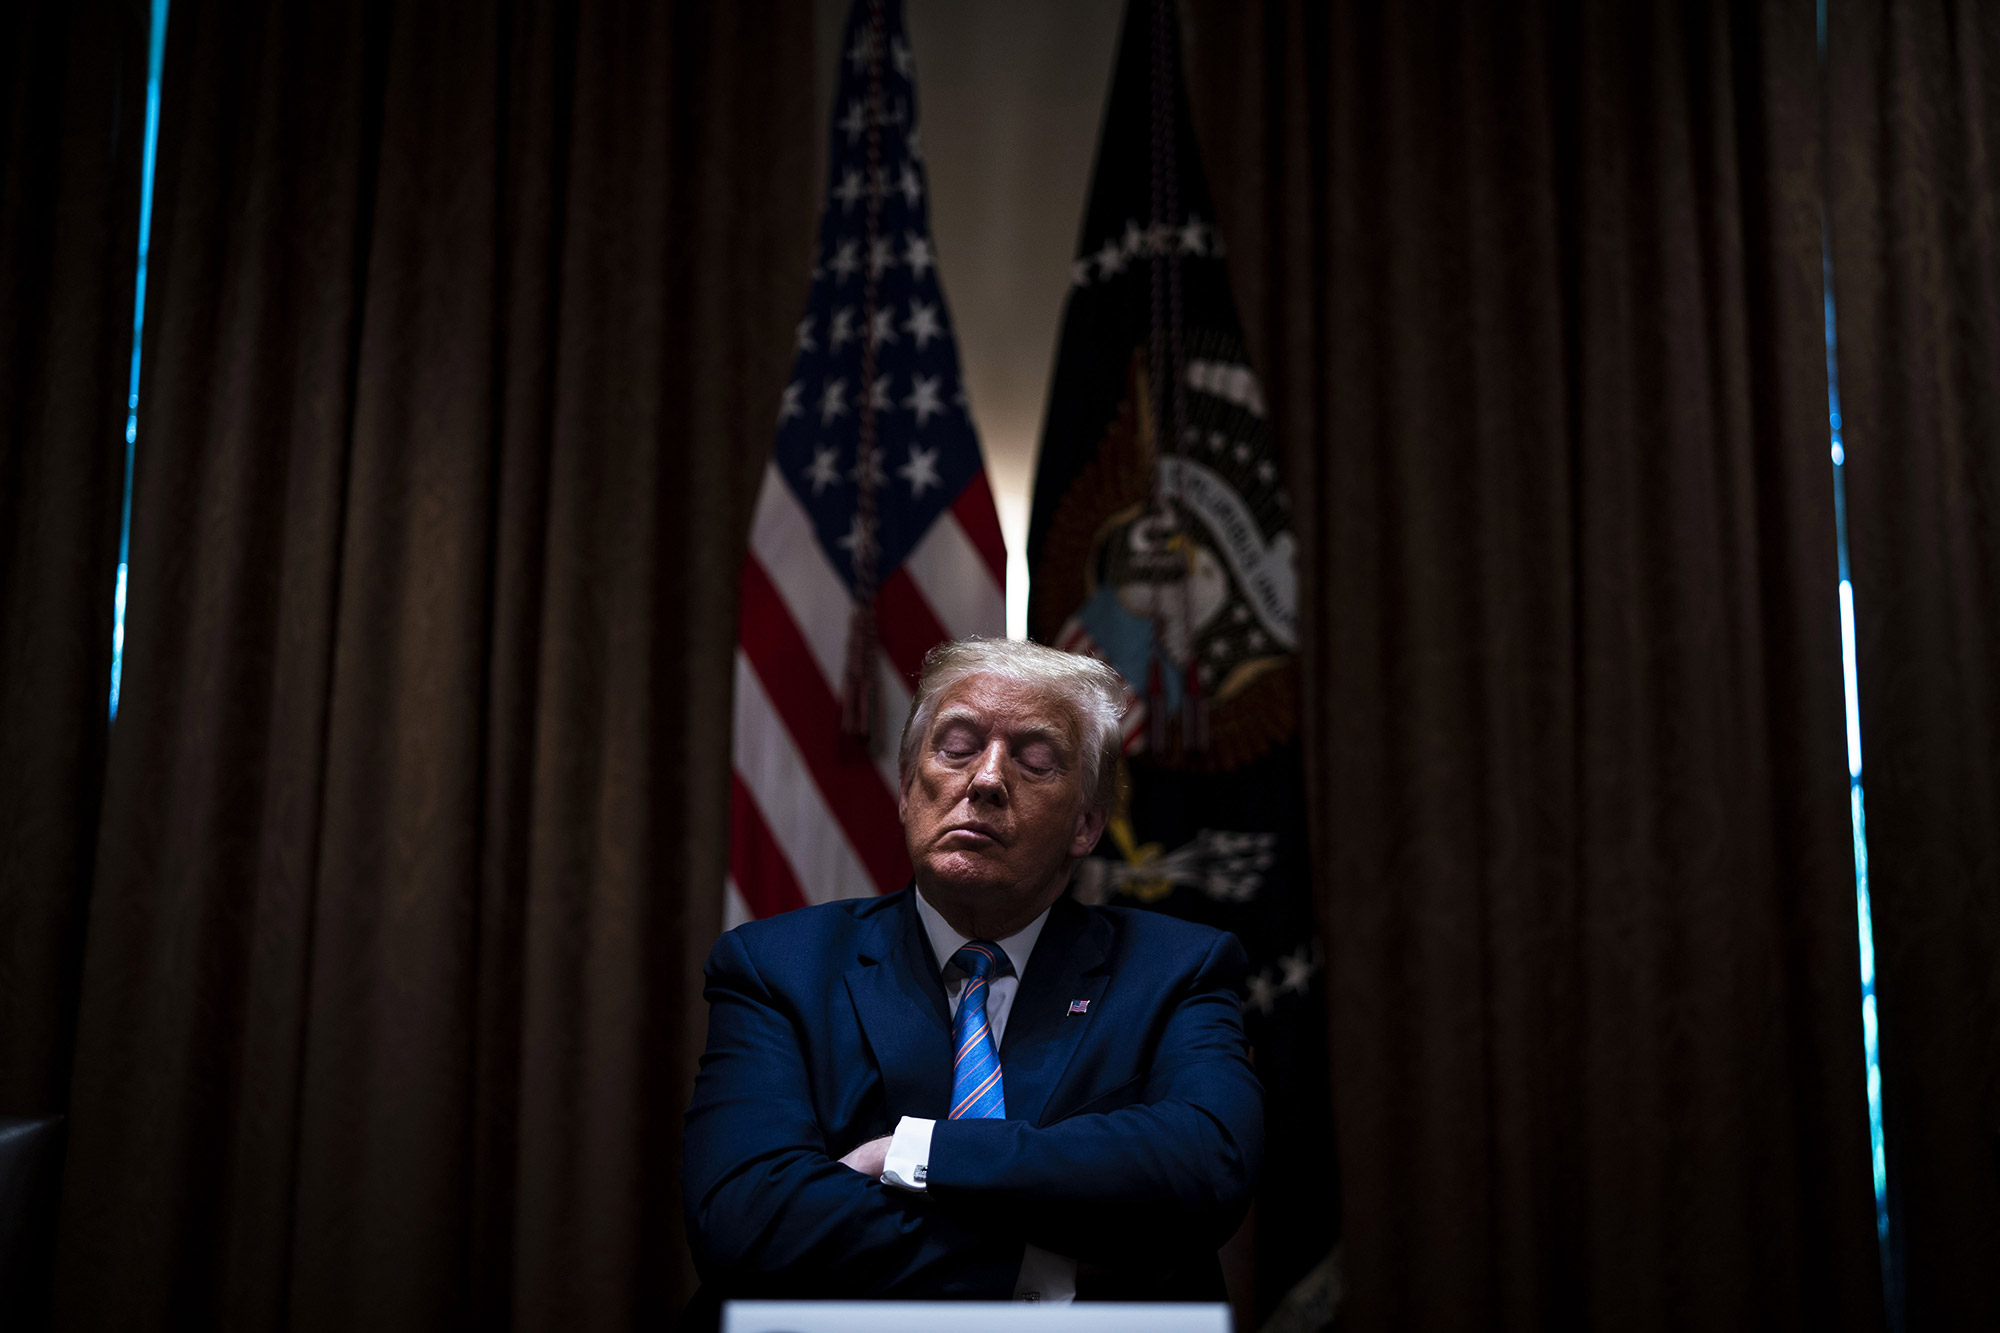 President Donald Trump listens during a meeting in Washington on June 15, 2020.